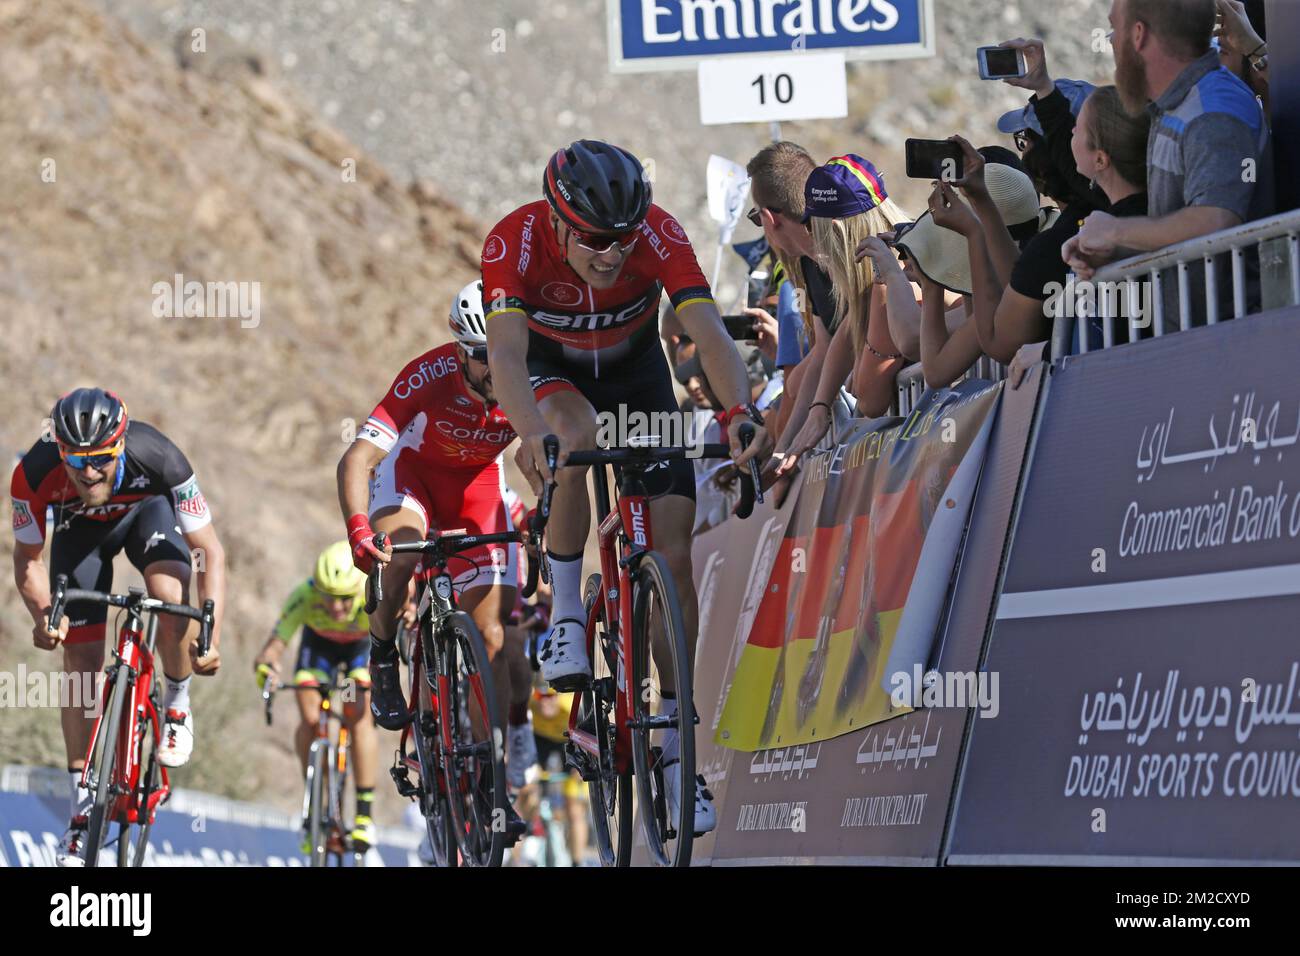 Belgian Loic Vliegen of BMC Racing Team pictured in action during stage 4 of the Dubai Tour 2018 cycling race, 172km from Dubai to Hatta Dam, United Arab Emirates, Friday 09 February 2018. The Dubai Tour 2018 is taking place from 6 to 10 February. BELGA PHOTO YUZURU SUNADA Stock Photo